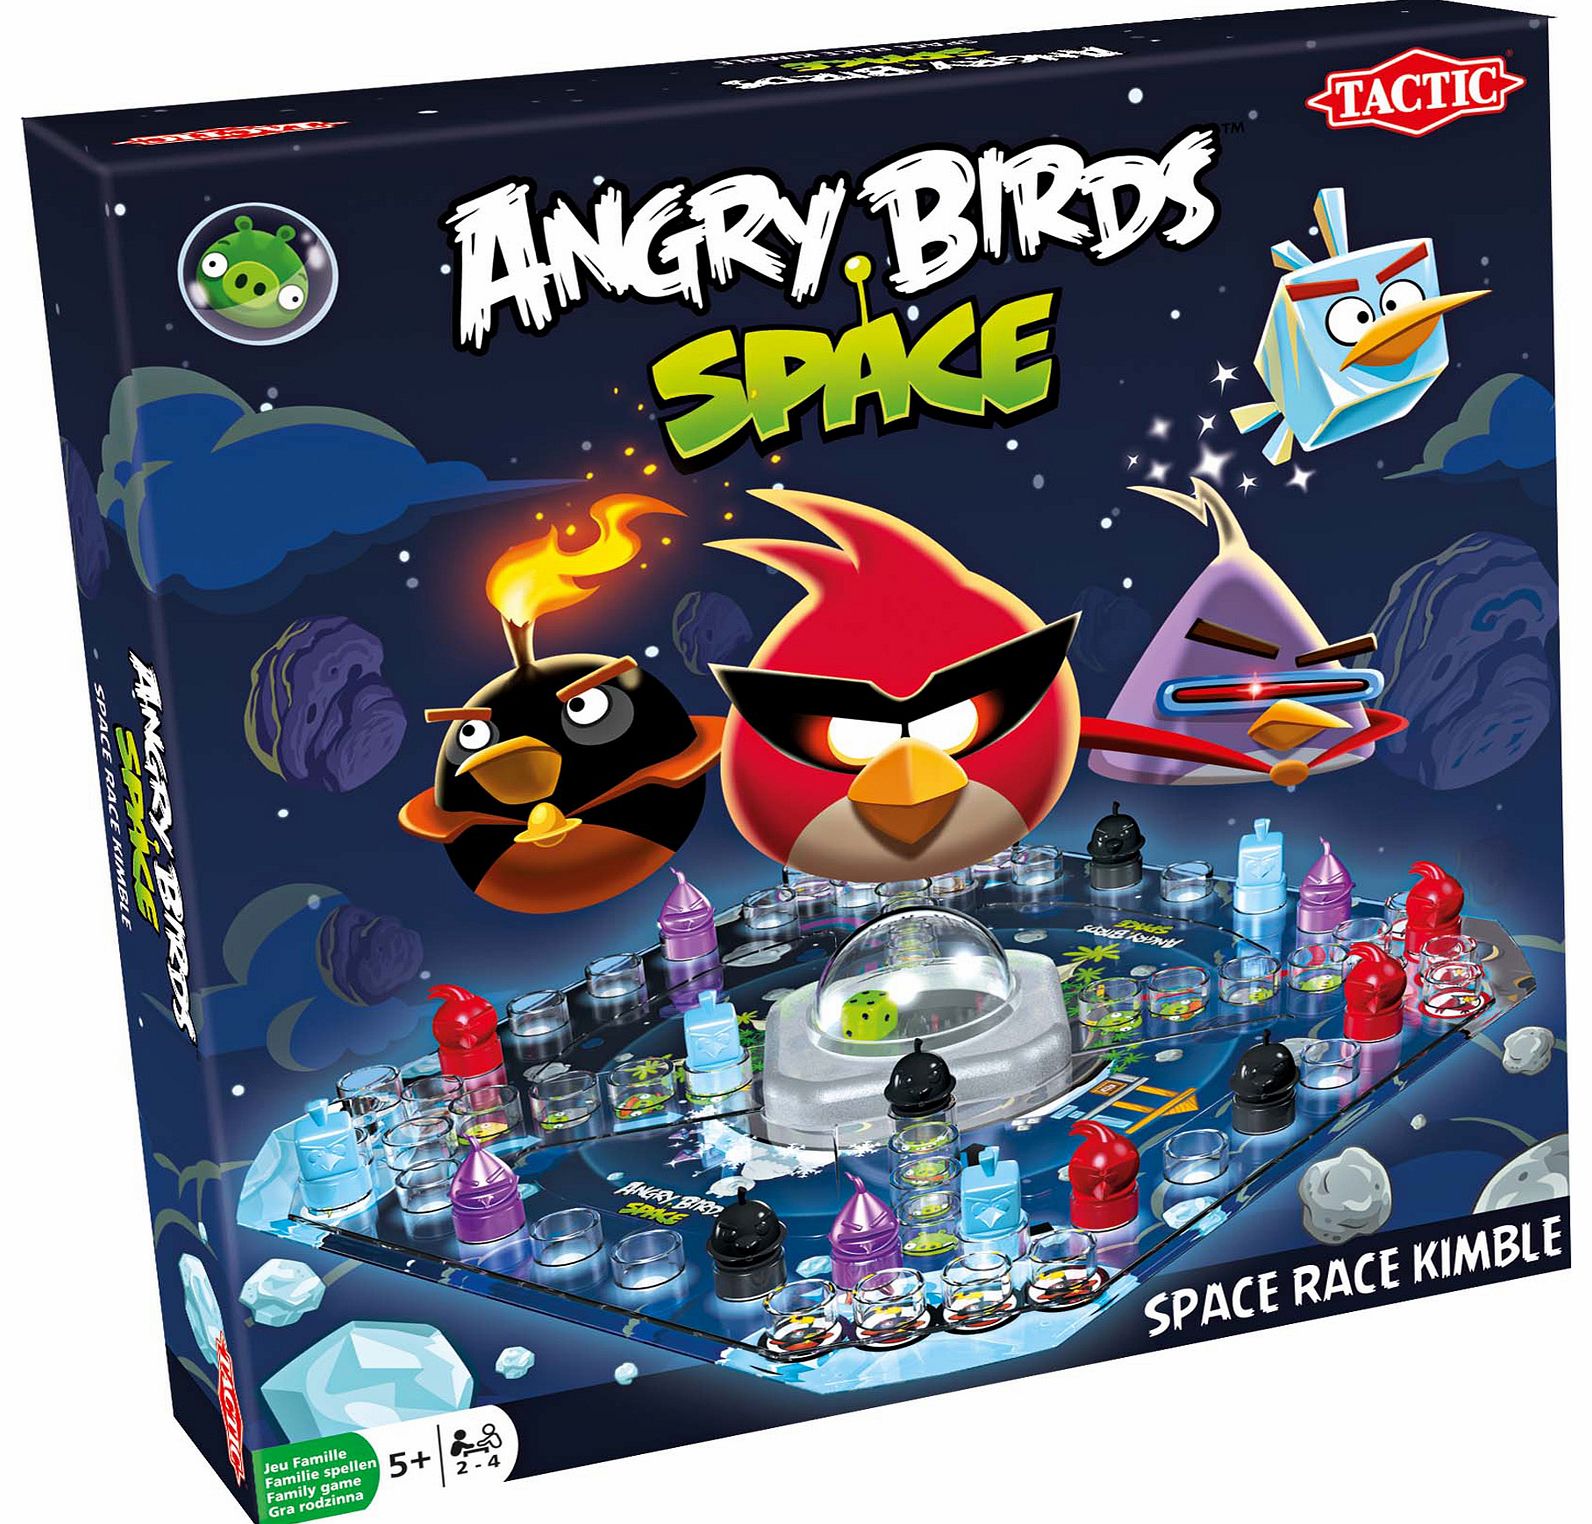 Tactic Angry Birds Space Race Kimble